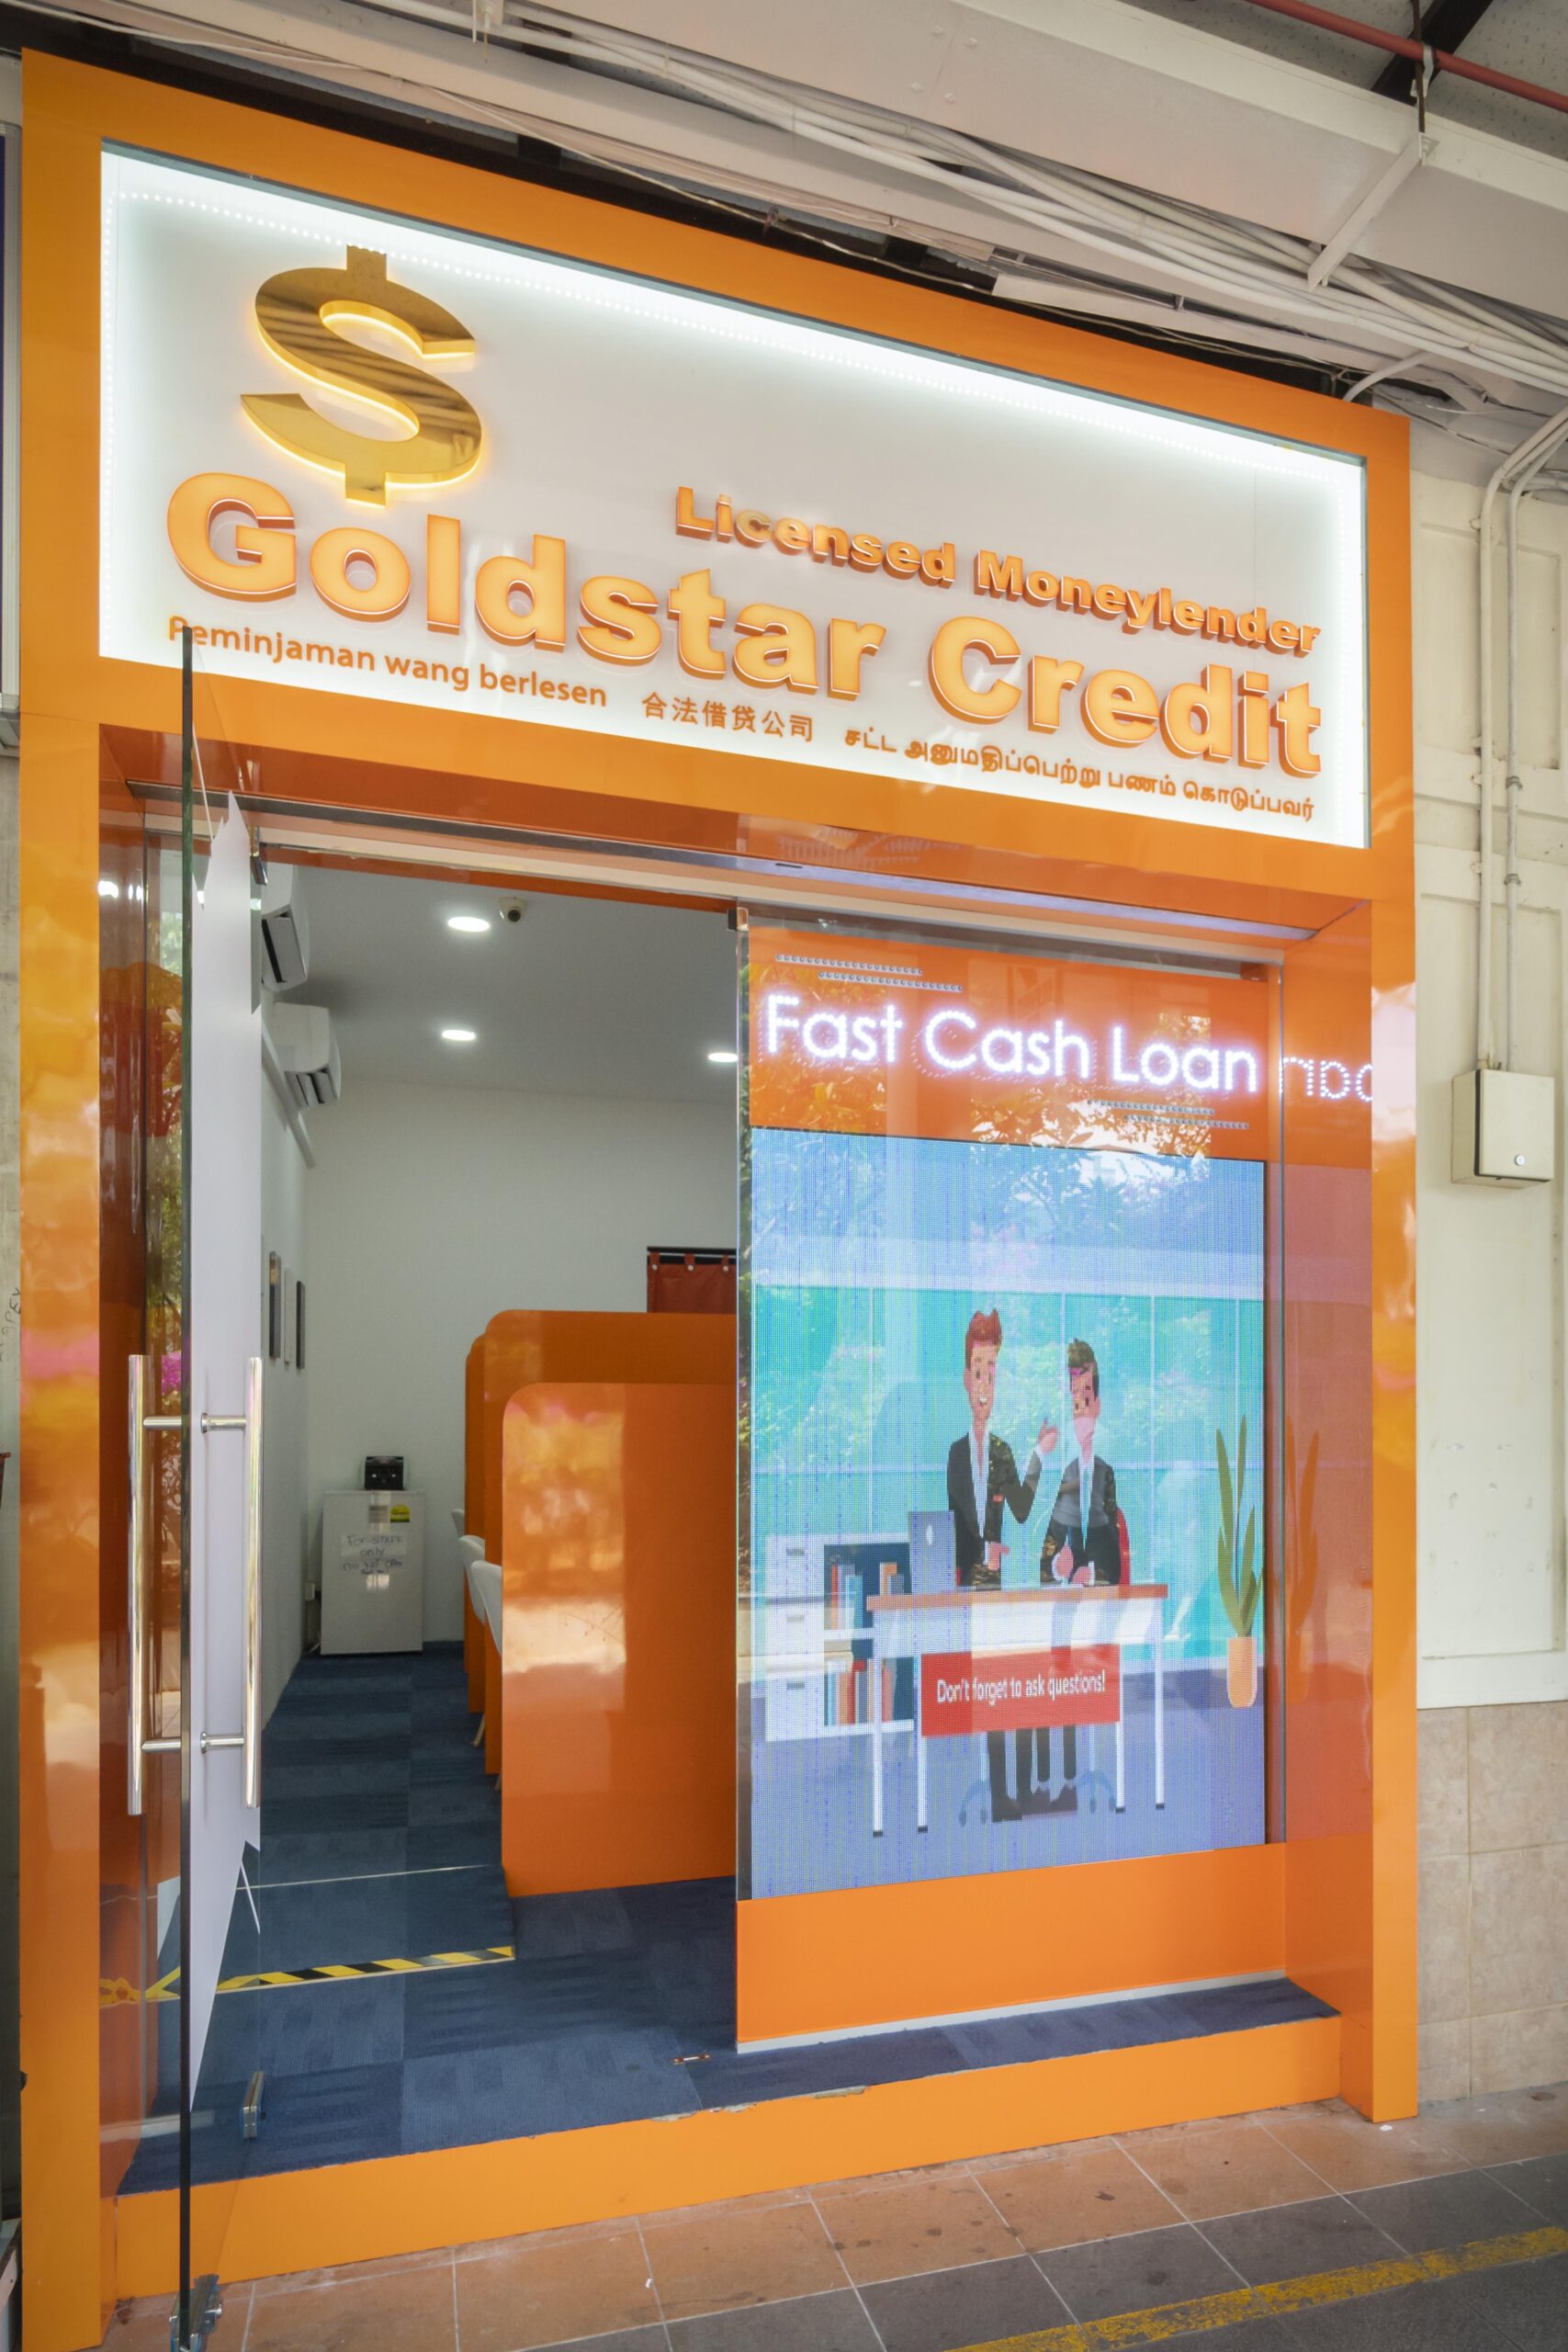 The office exterior of Goldstar's Toa Payoh branch